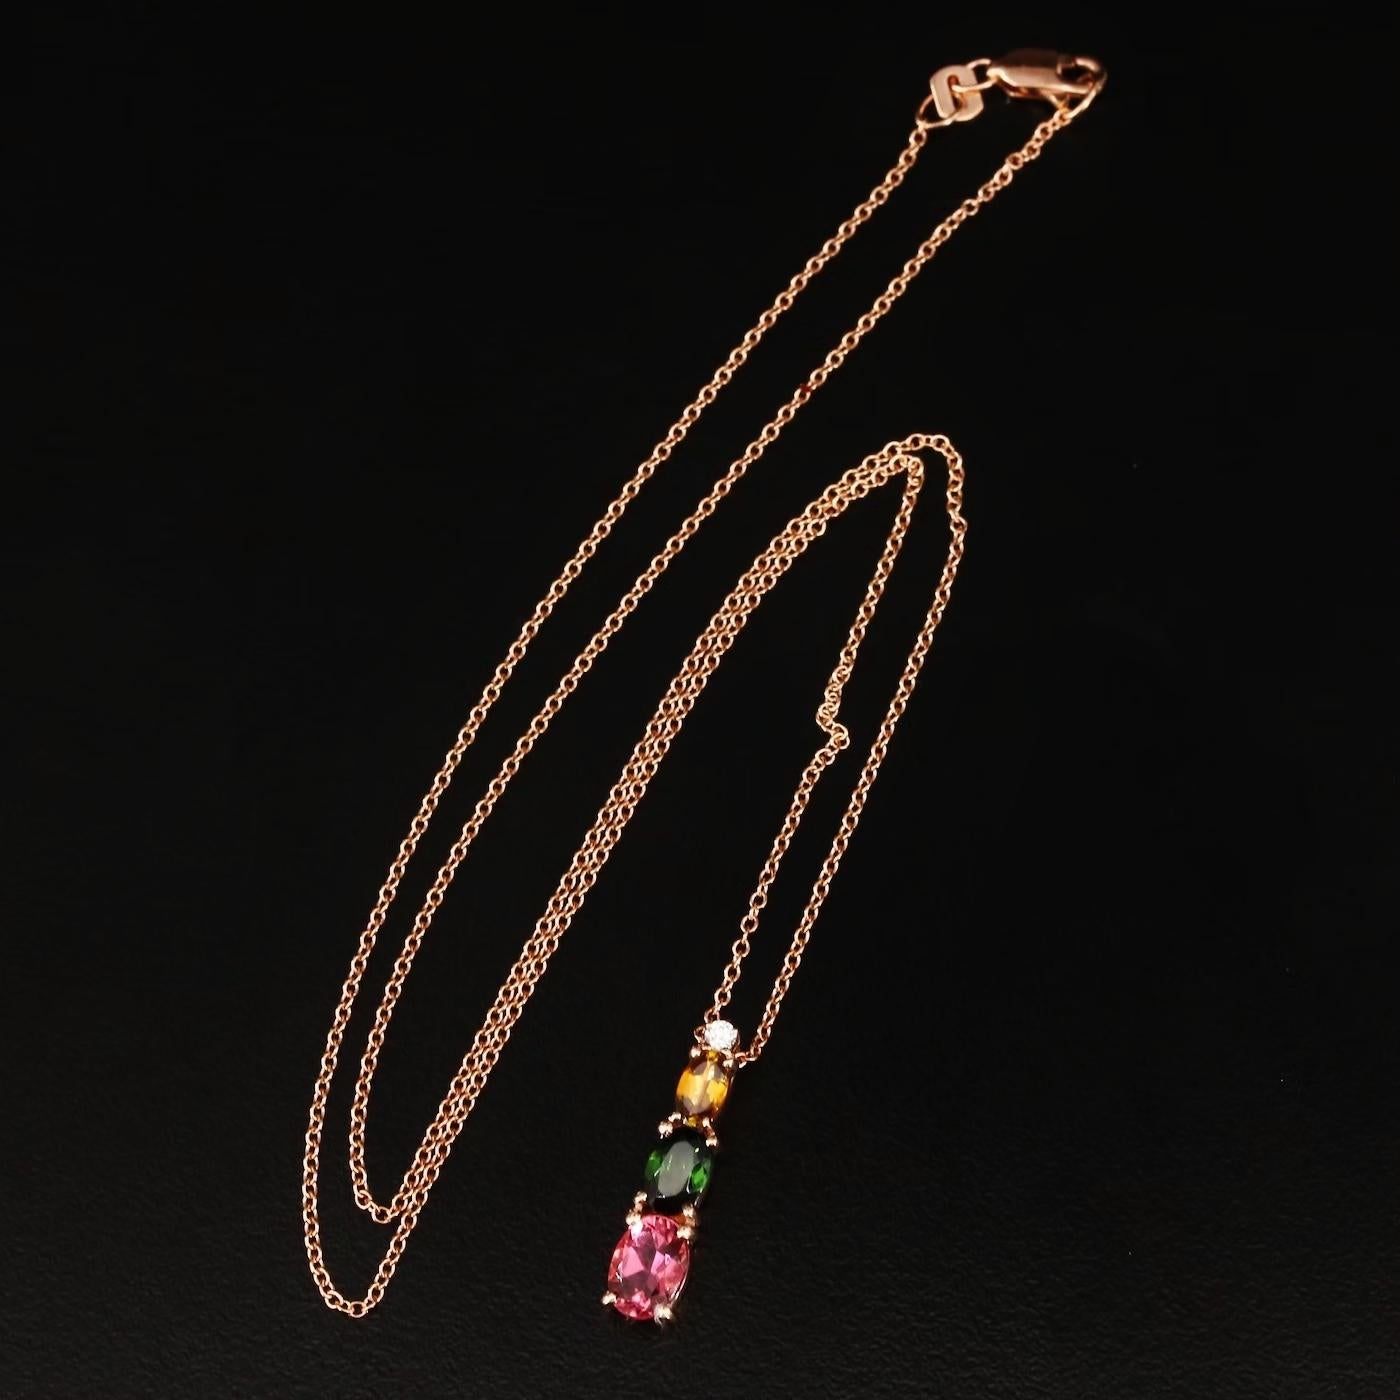 Oval Cut $3750 / NEW / EFFY Watercolors Diamond & Tourmaline Necklace / 14K Gold For Sale